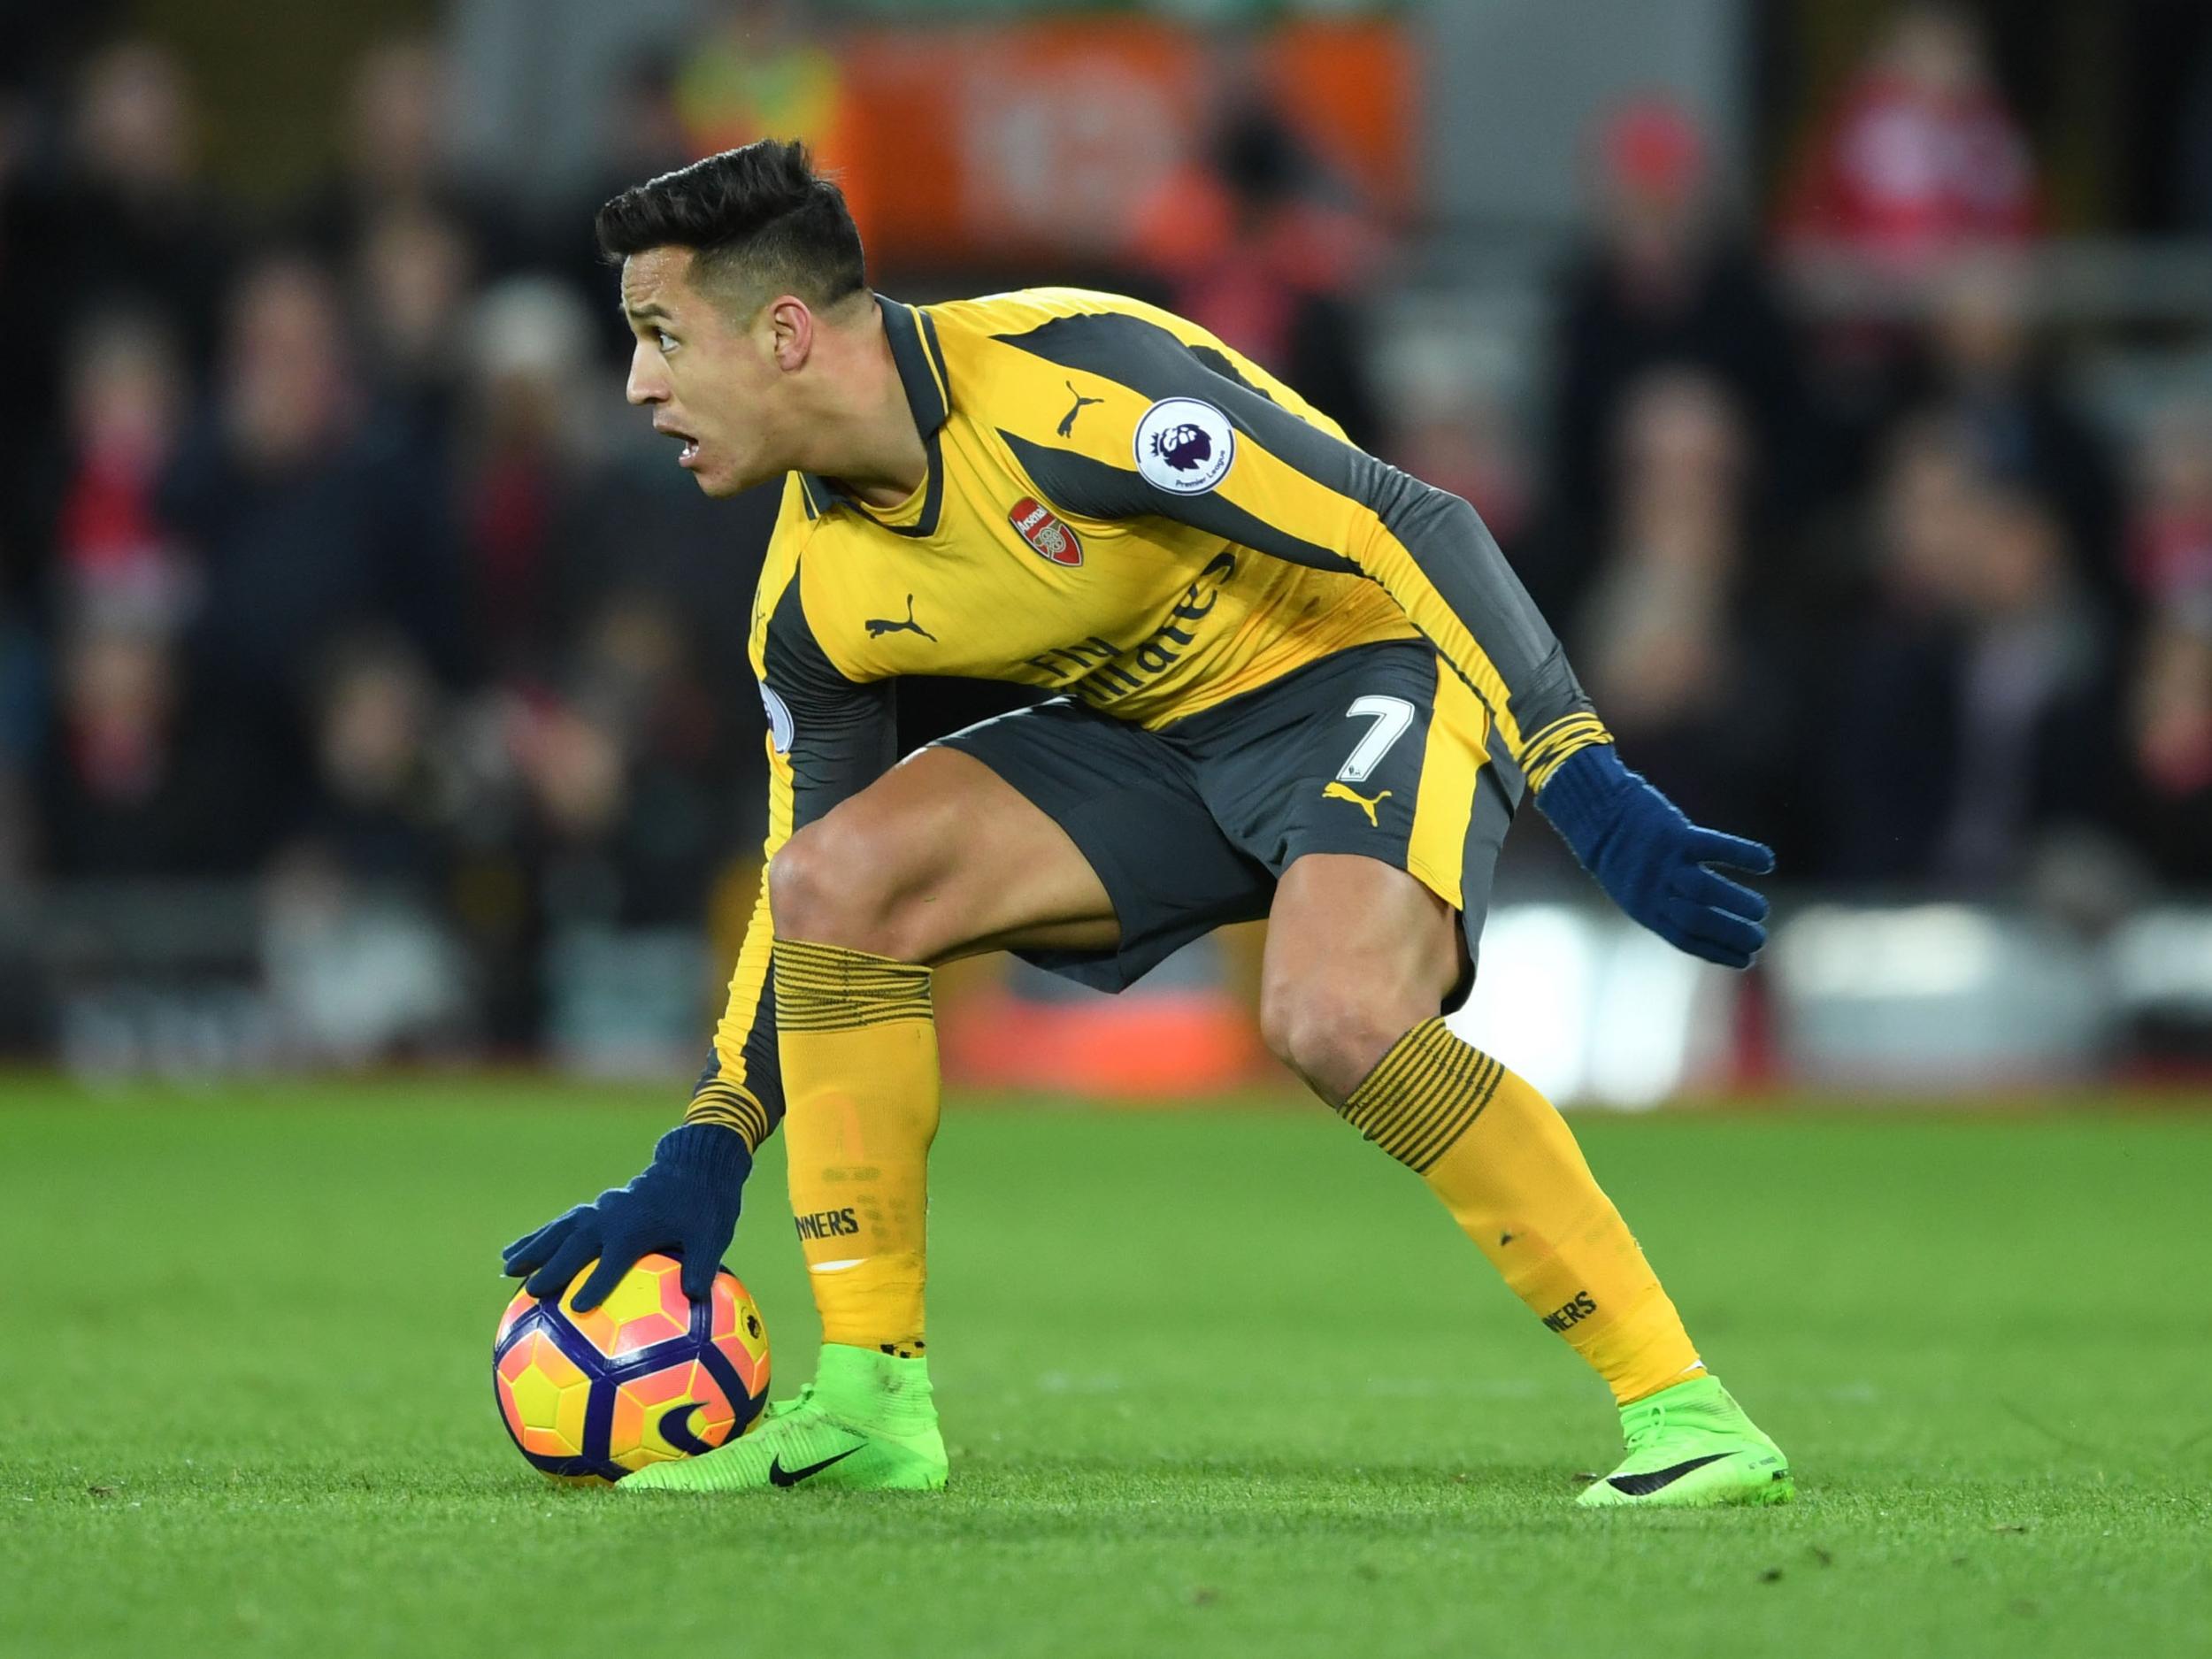 Sanchez briefly made Arsenal the better team after his introduction